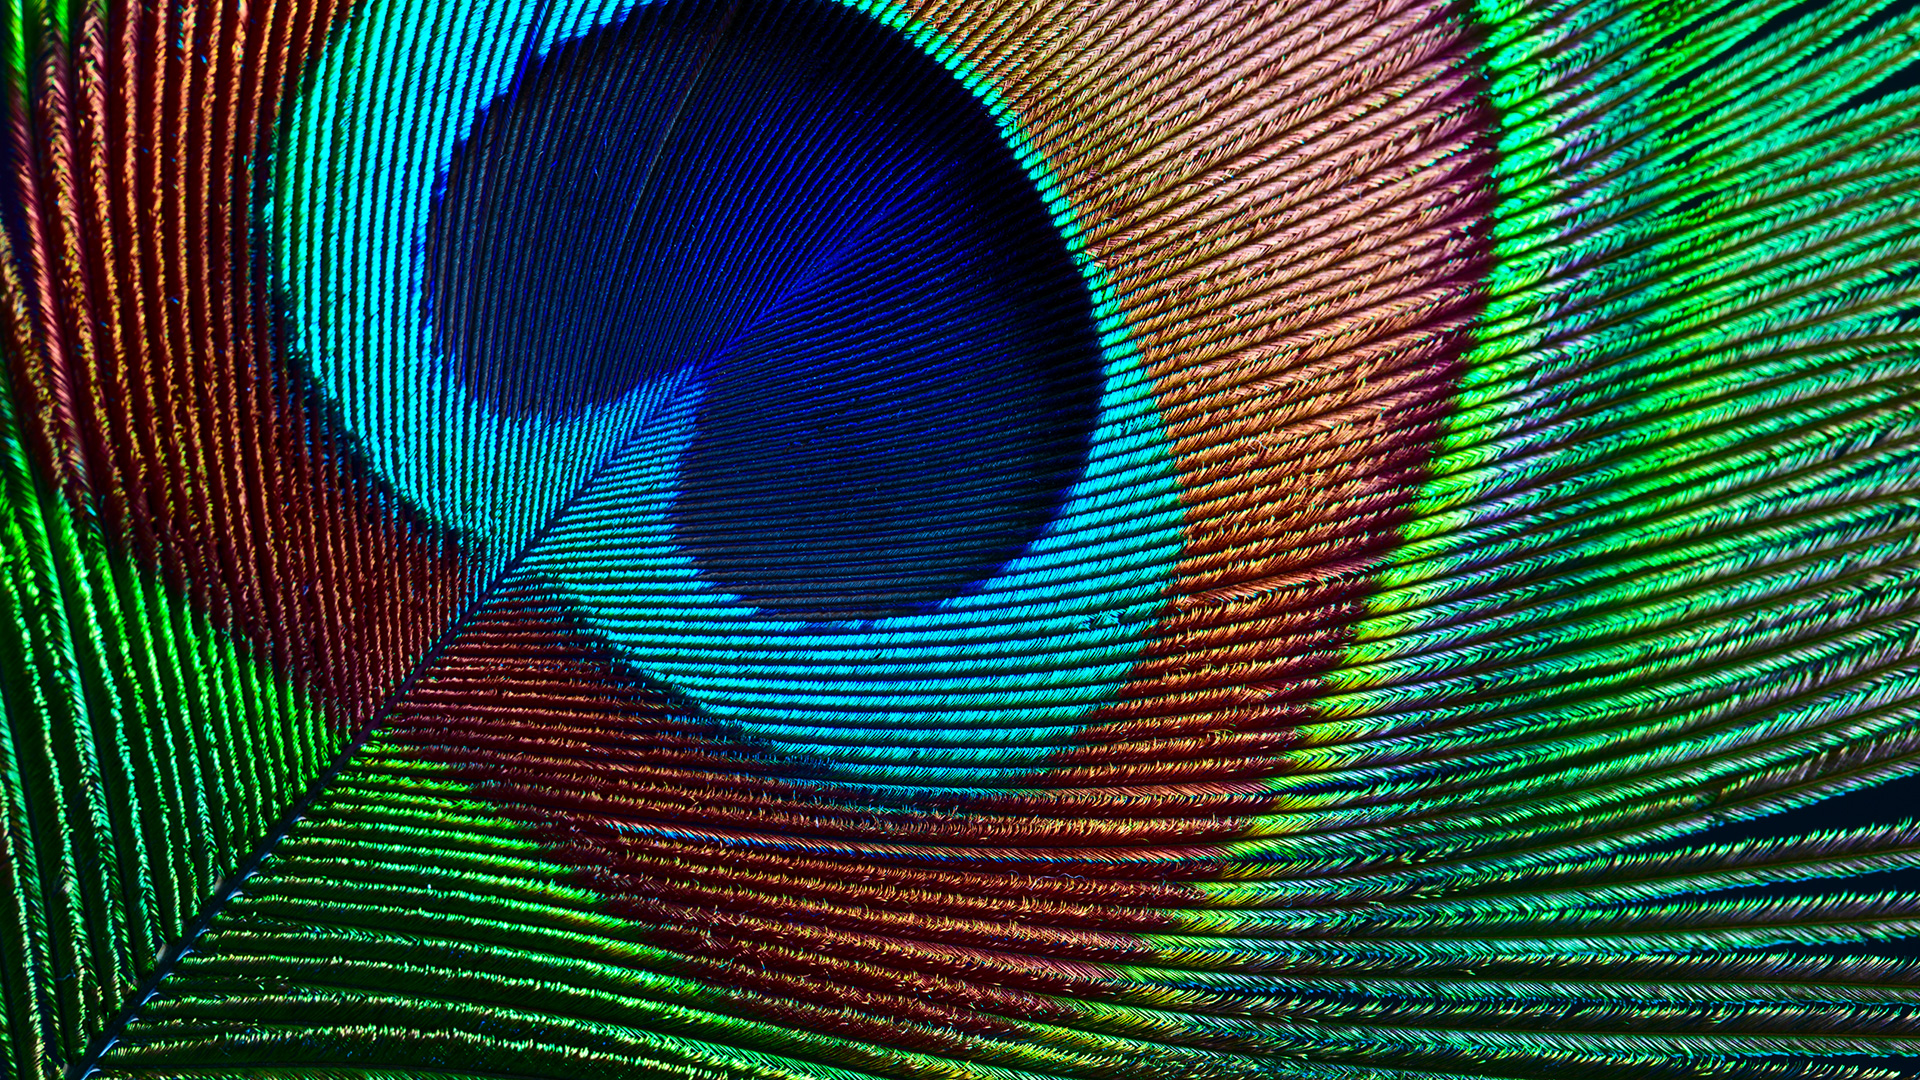 Close up of peacock feather